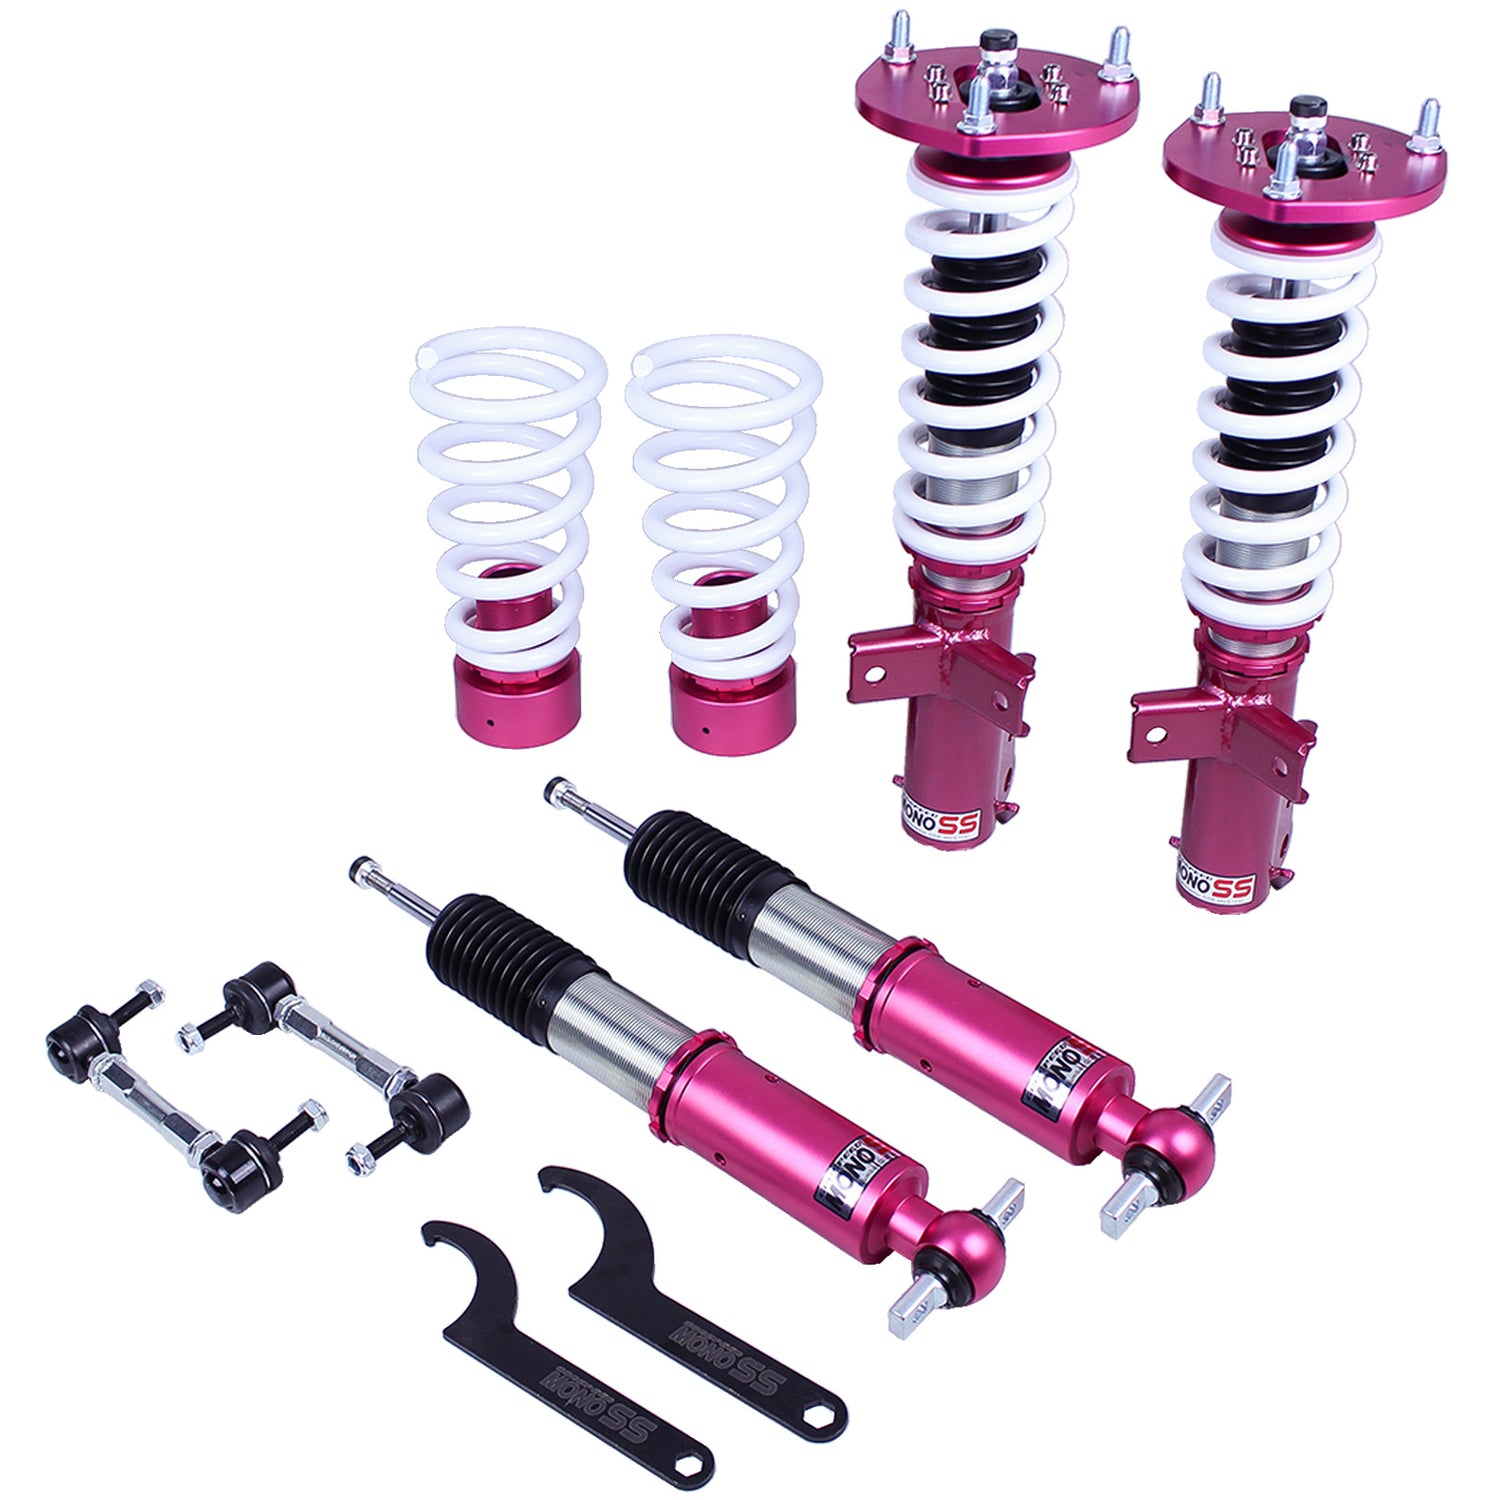 Godspeed MSS1091 MonoSS Coilover Lowering Kit, Fully Adjustable, Ride Height, Spring Tension And 16 Click Damping, Ford Mustang 2015+UP